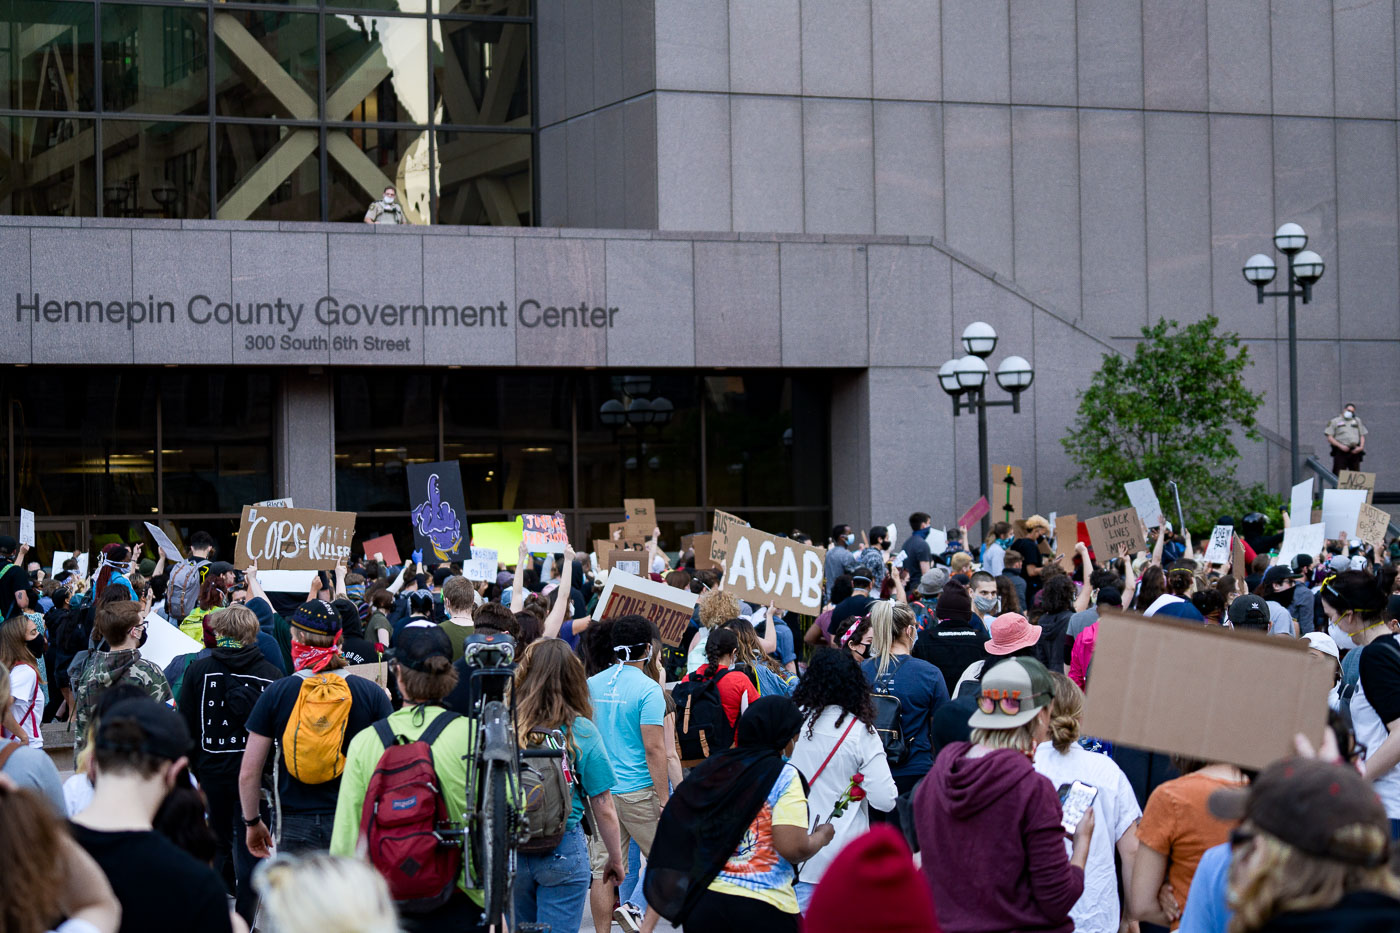 Protesters with signs in front of Hennepin County Government Center